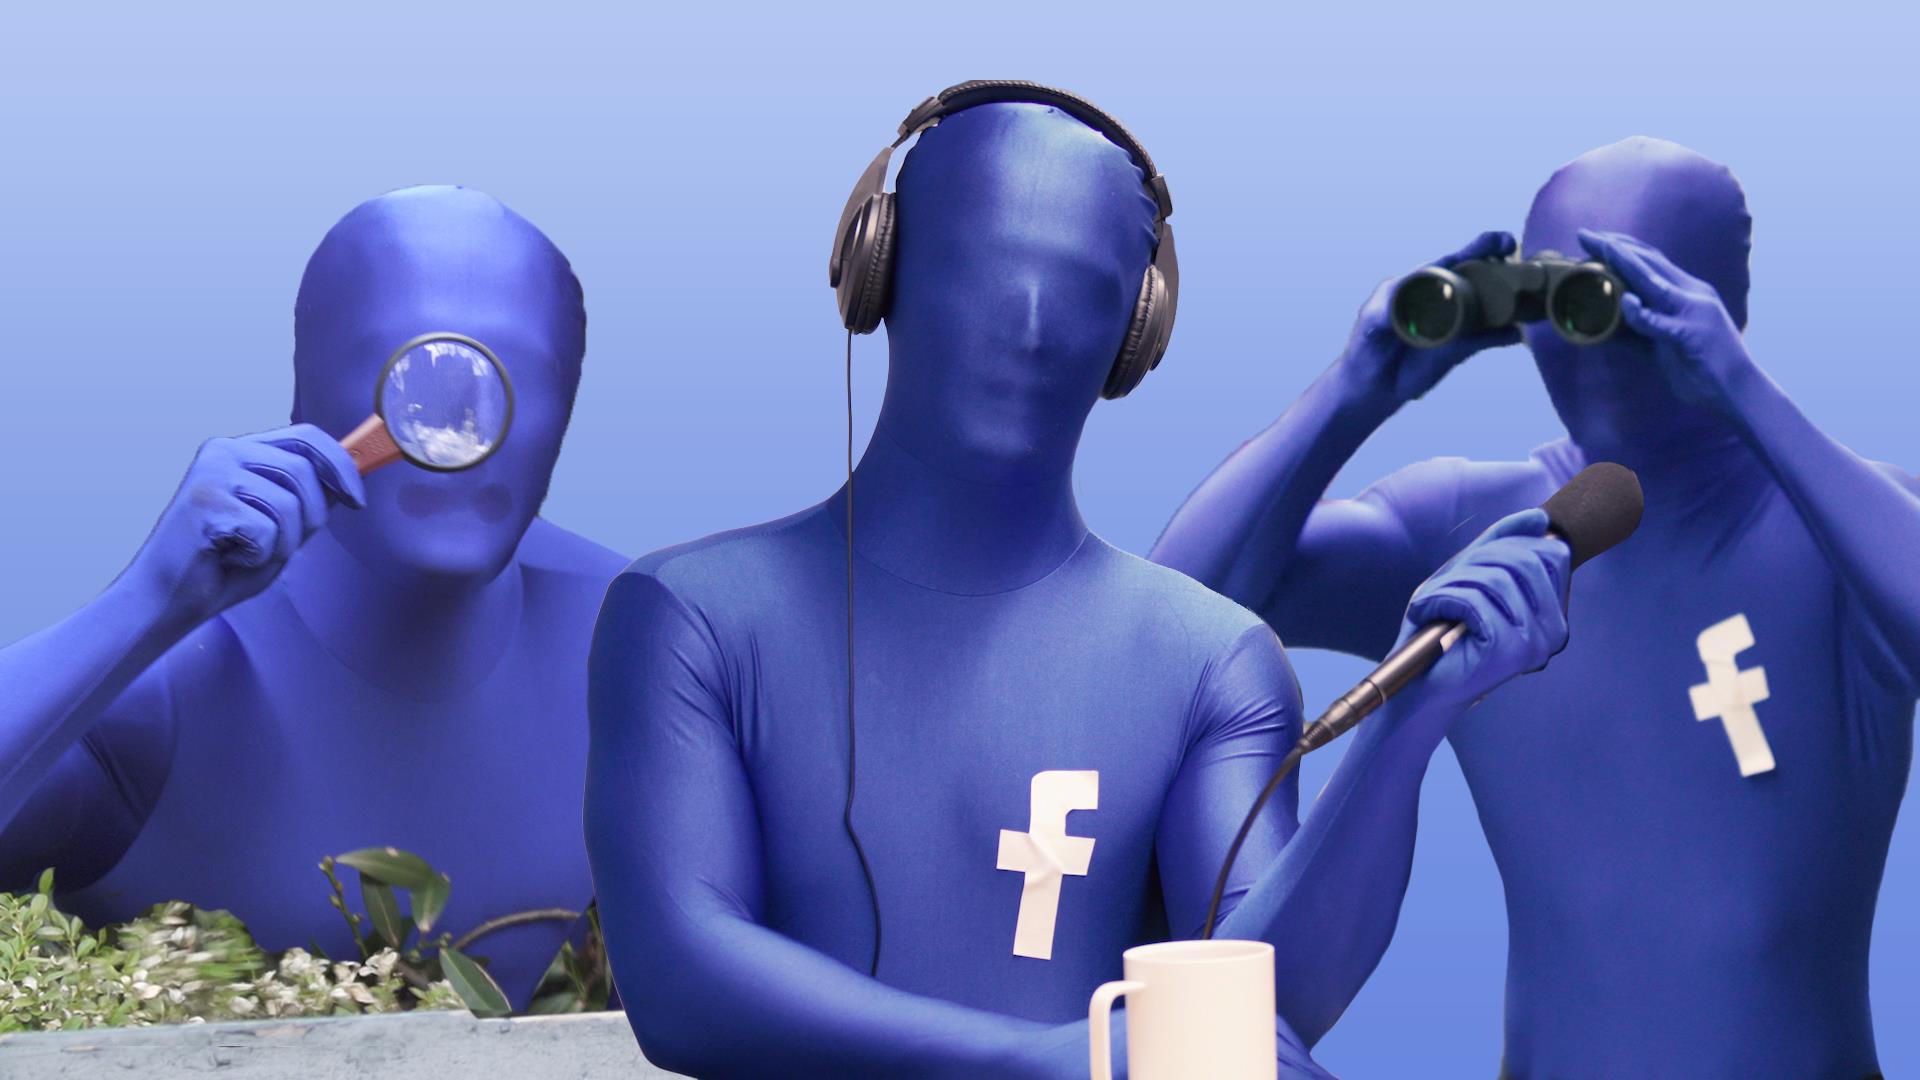 From Facebook, we almost doubled the user data, than we thought